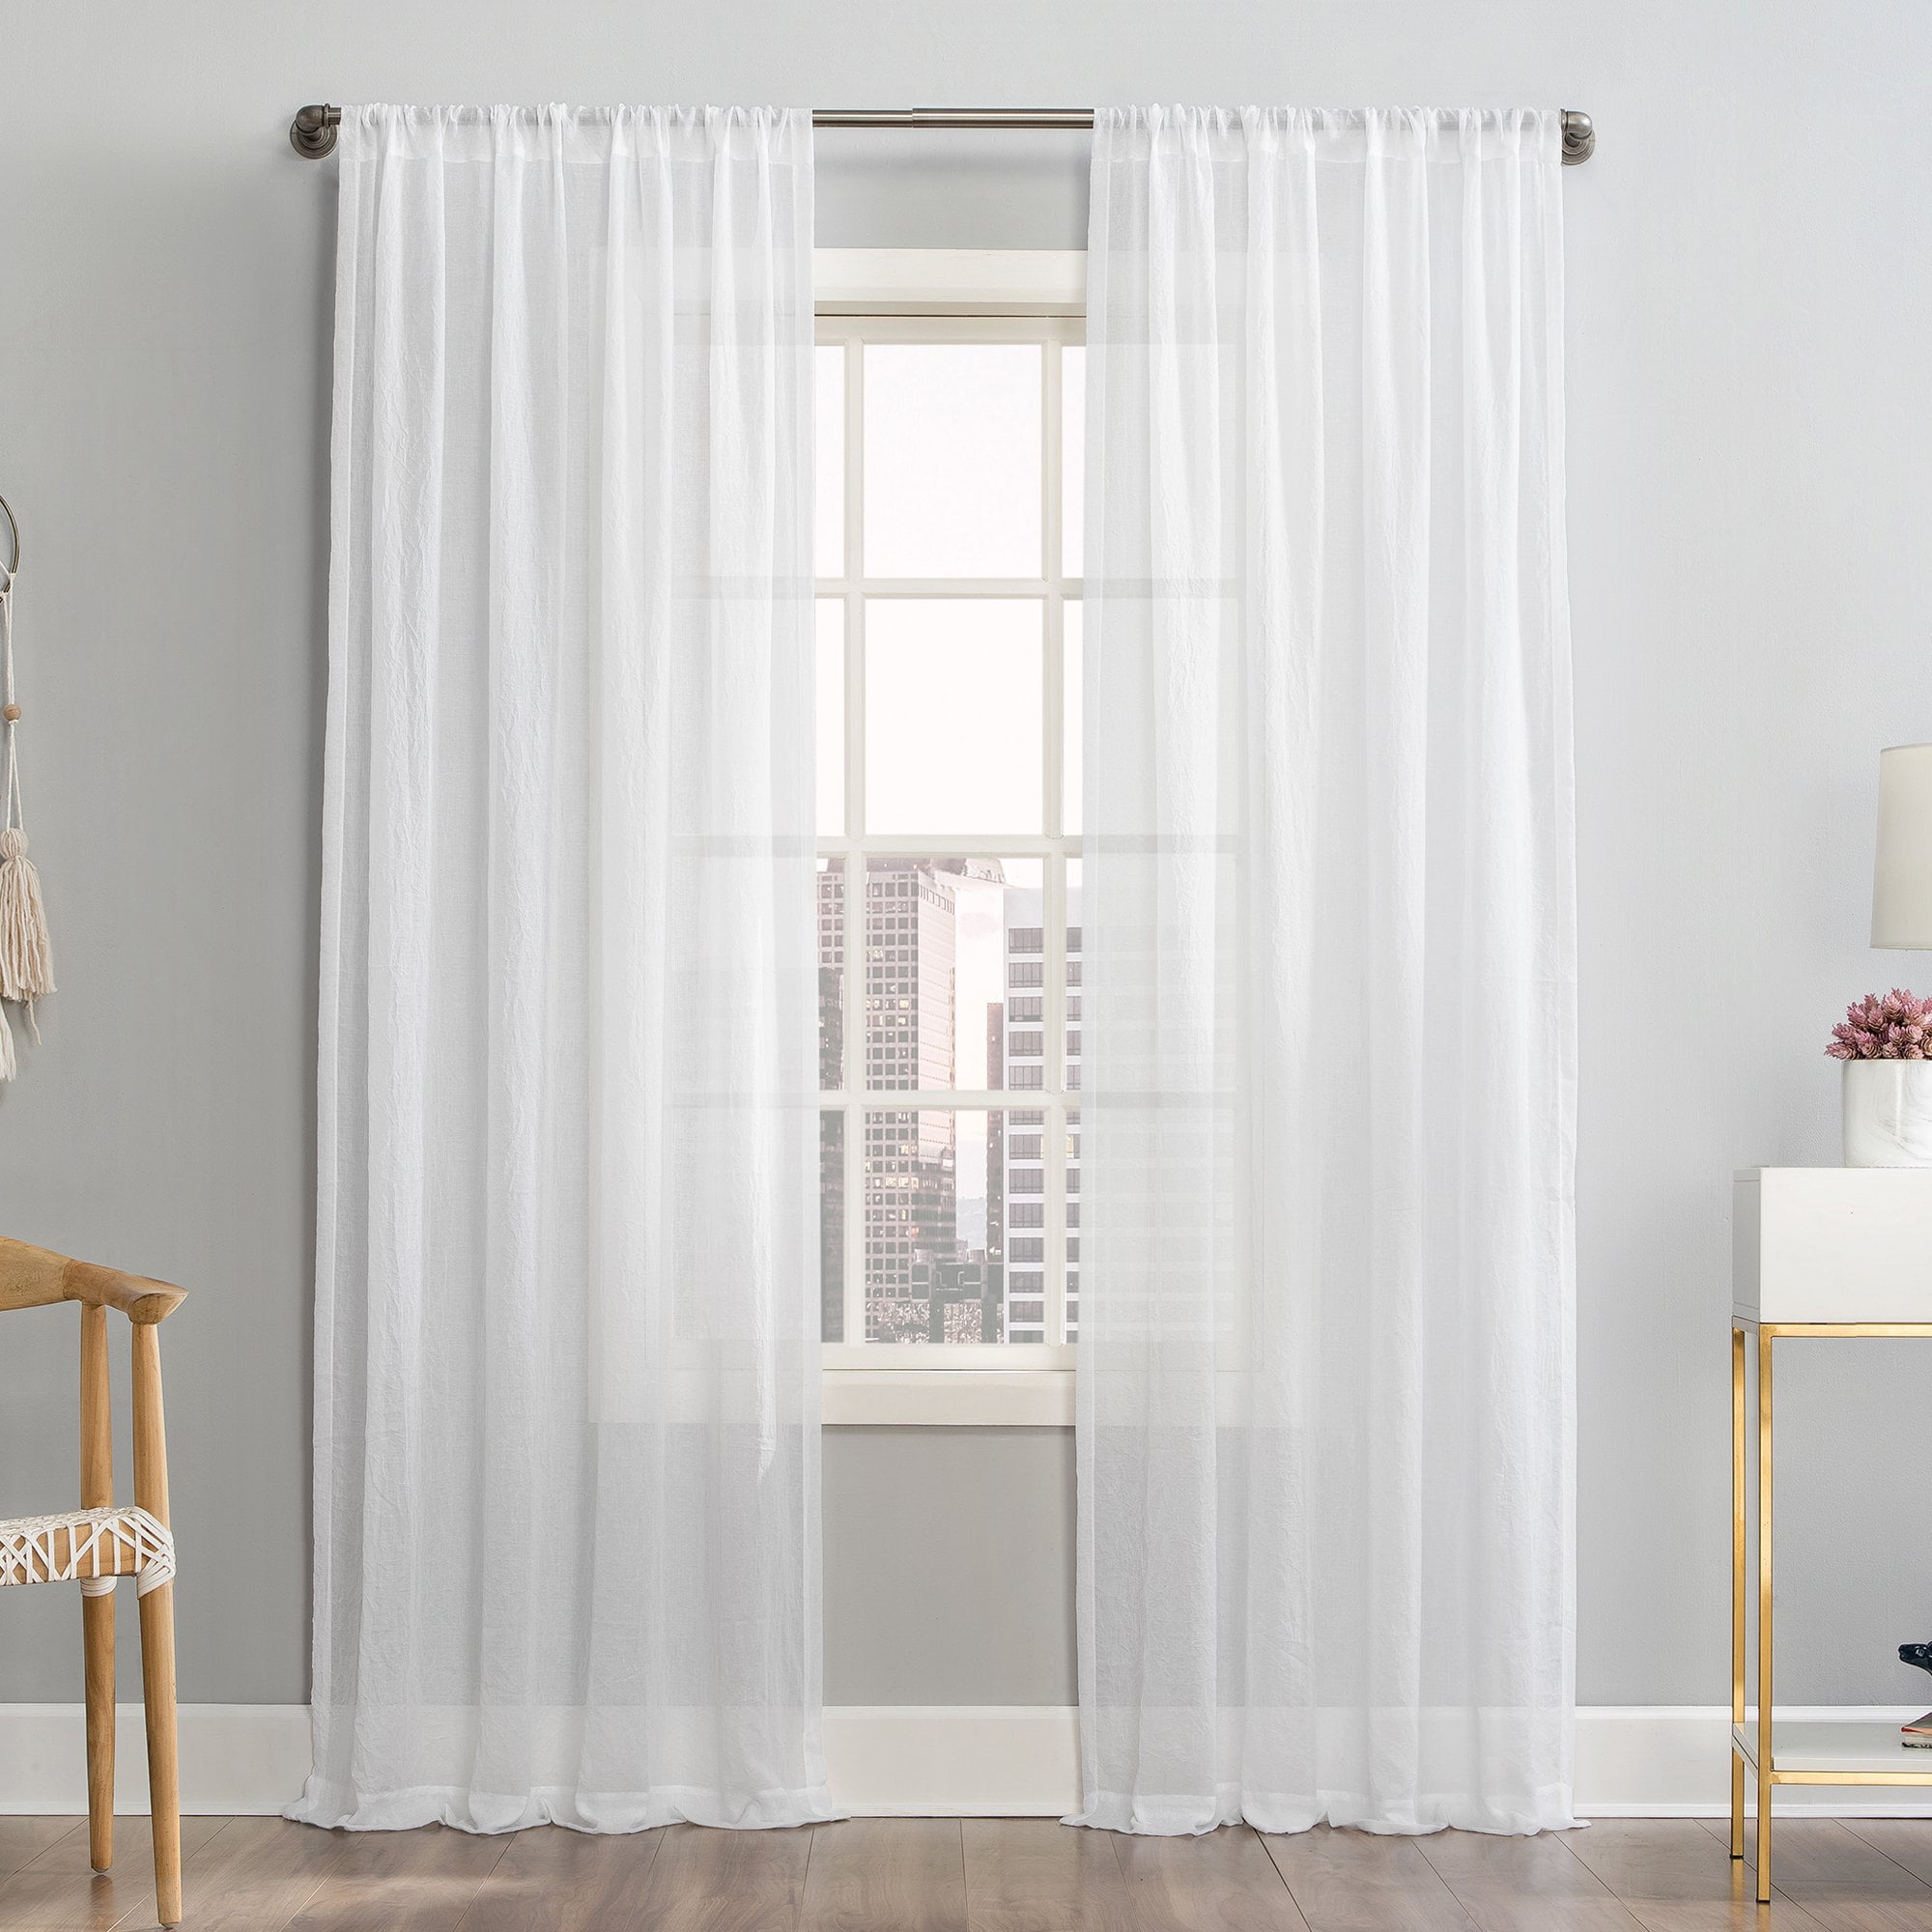 DWCN Grey Sheer Curtains for Living Room Bedroom - Faux Linen Look